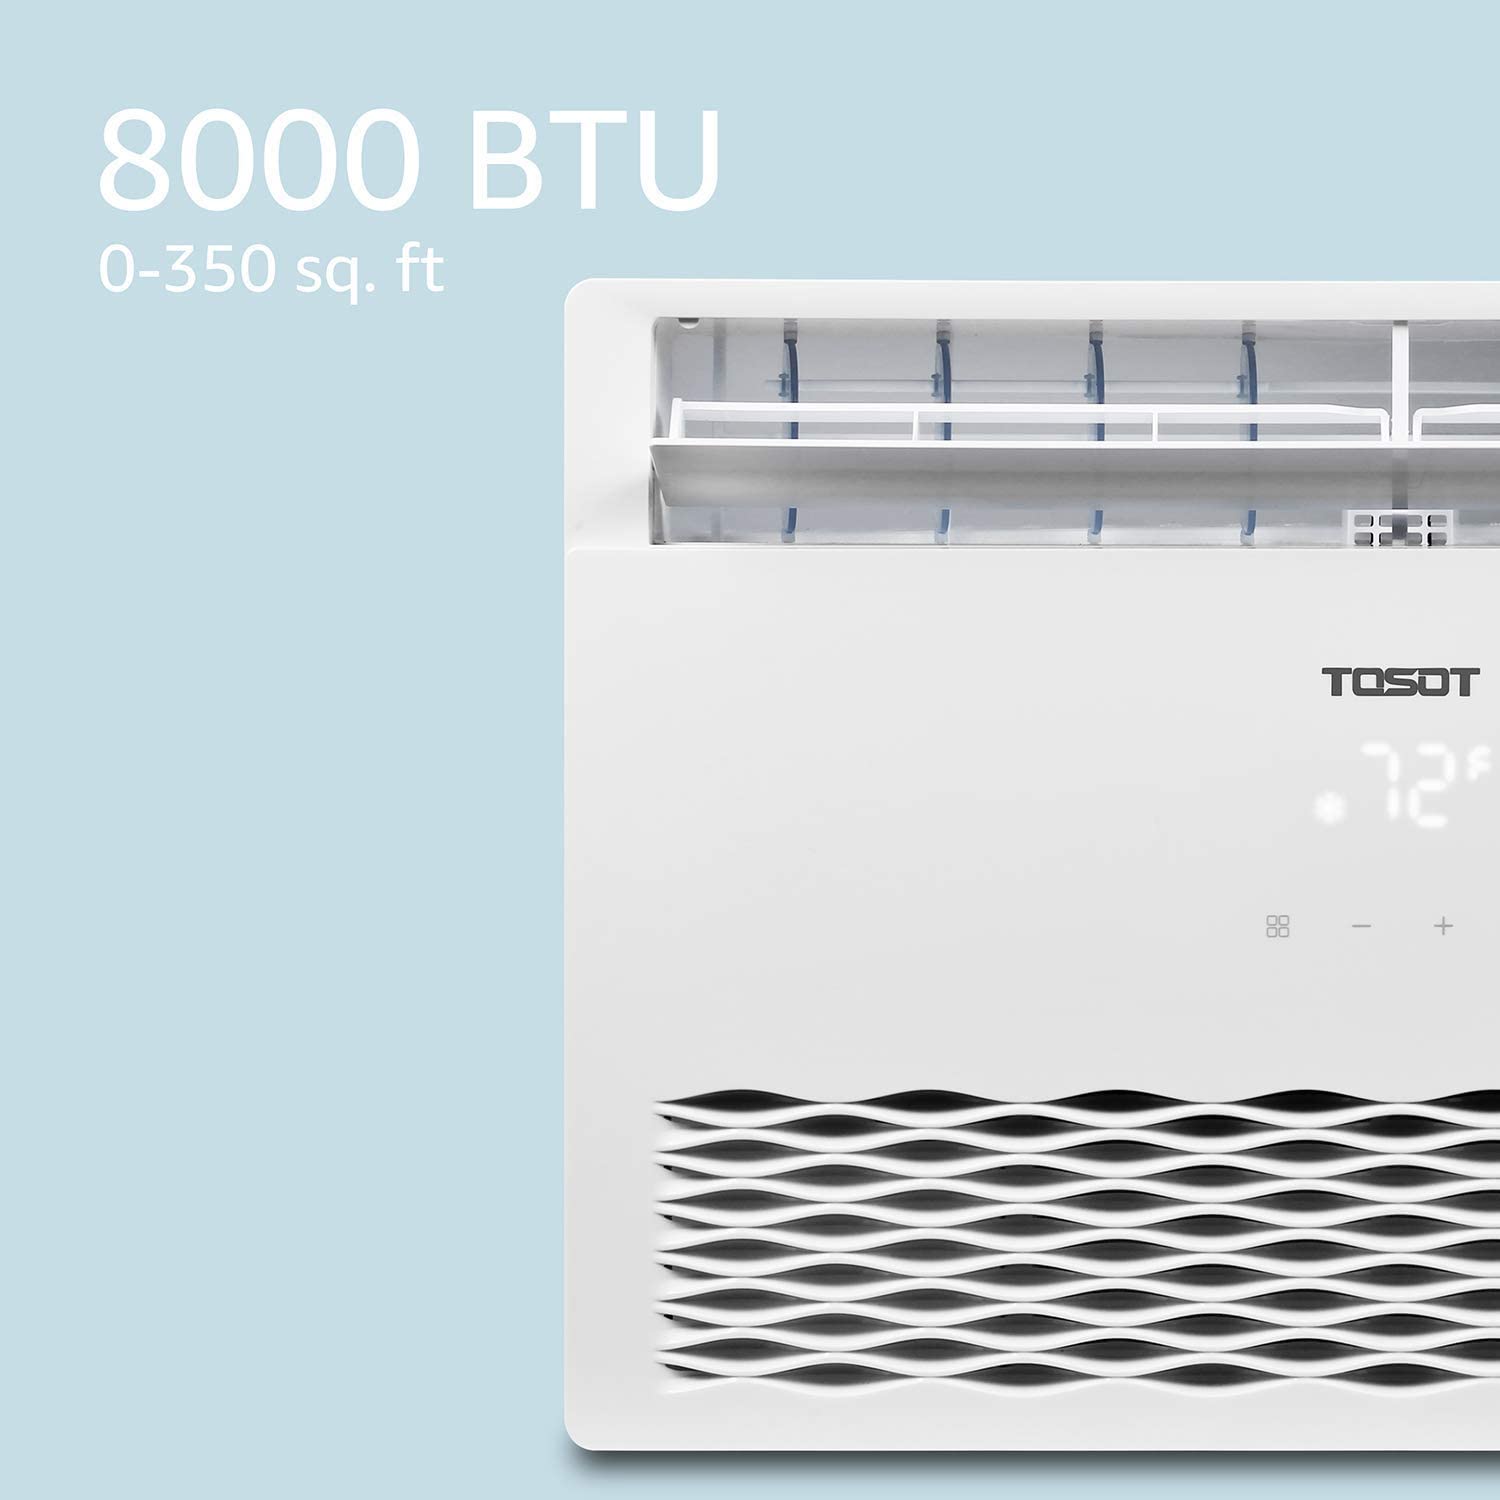 10 BEST 8000 BTU WINDOW AIR CONDITIONER 2022 REVIEW All In One Cooling Gear Lab: Any Refrigerators Air Conditioners Freezers Ice Makers Coolers Fans Reviewed And Compared.